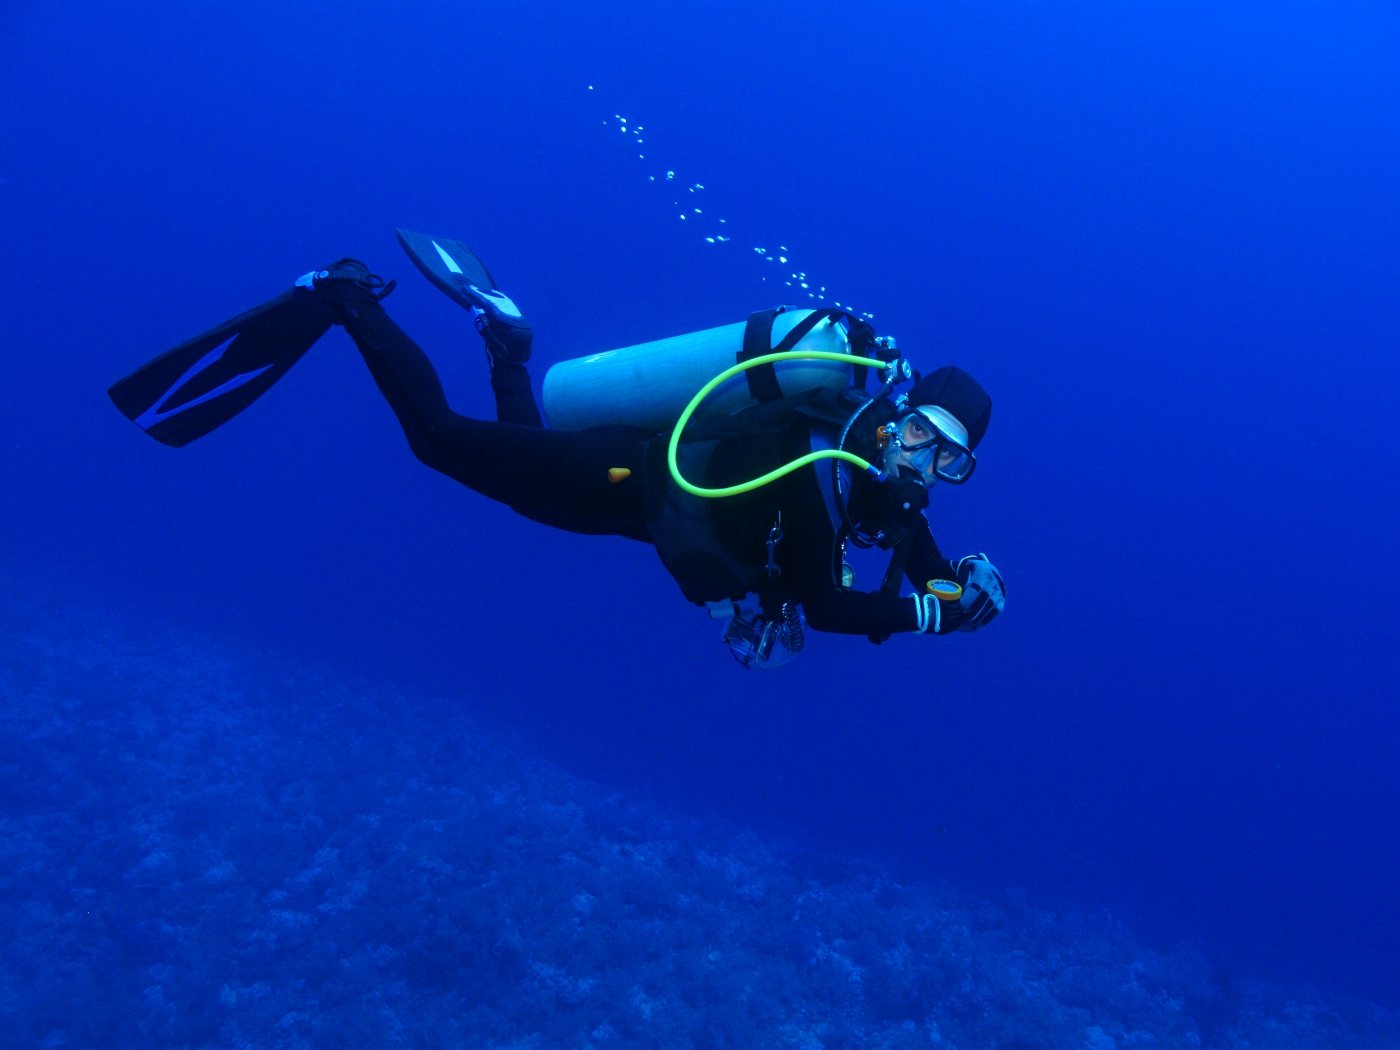 Kate in the deep blue, during the test of modified recreational equipment.